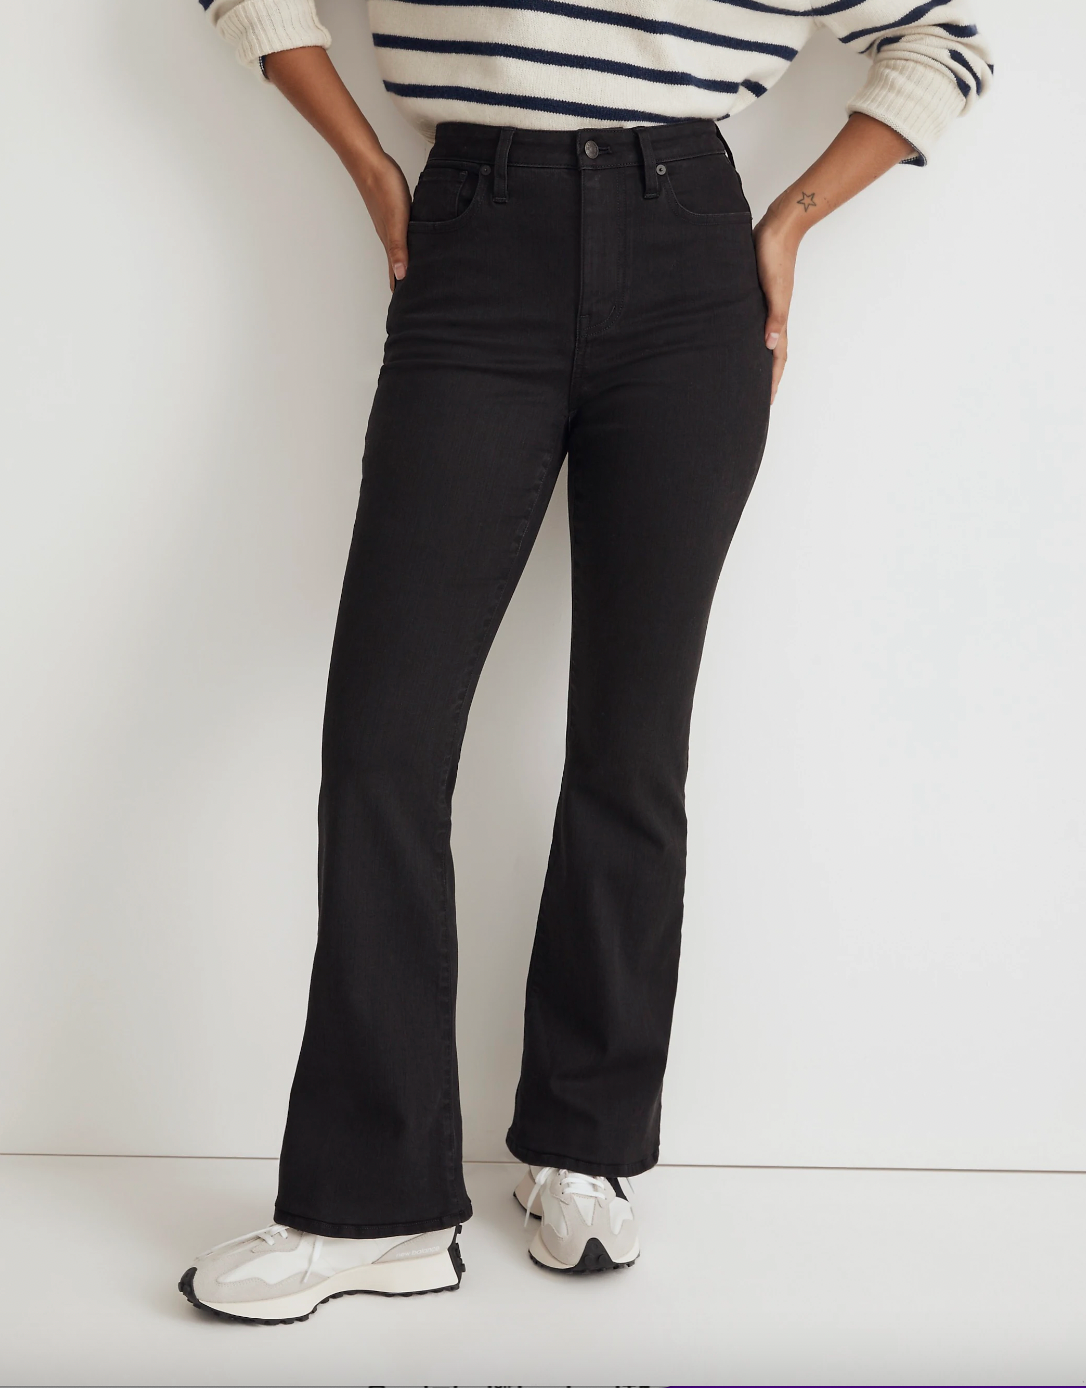 Madewell + Petite Curvy Skinny Flare Jeans in Black Frost Wash